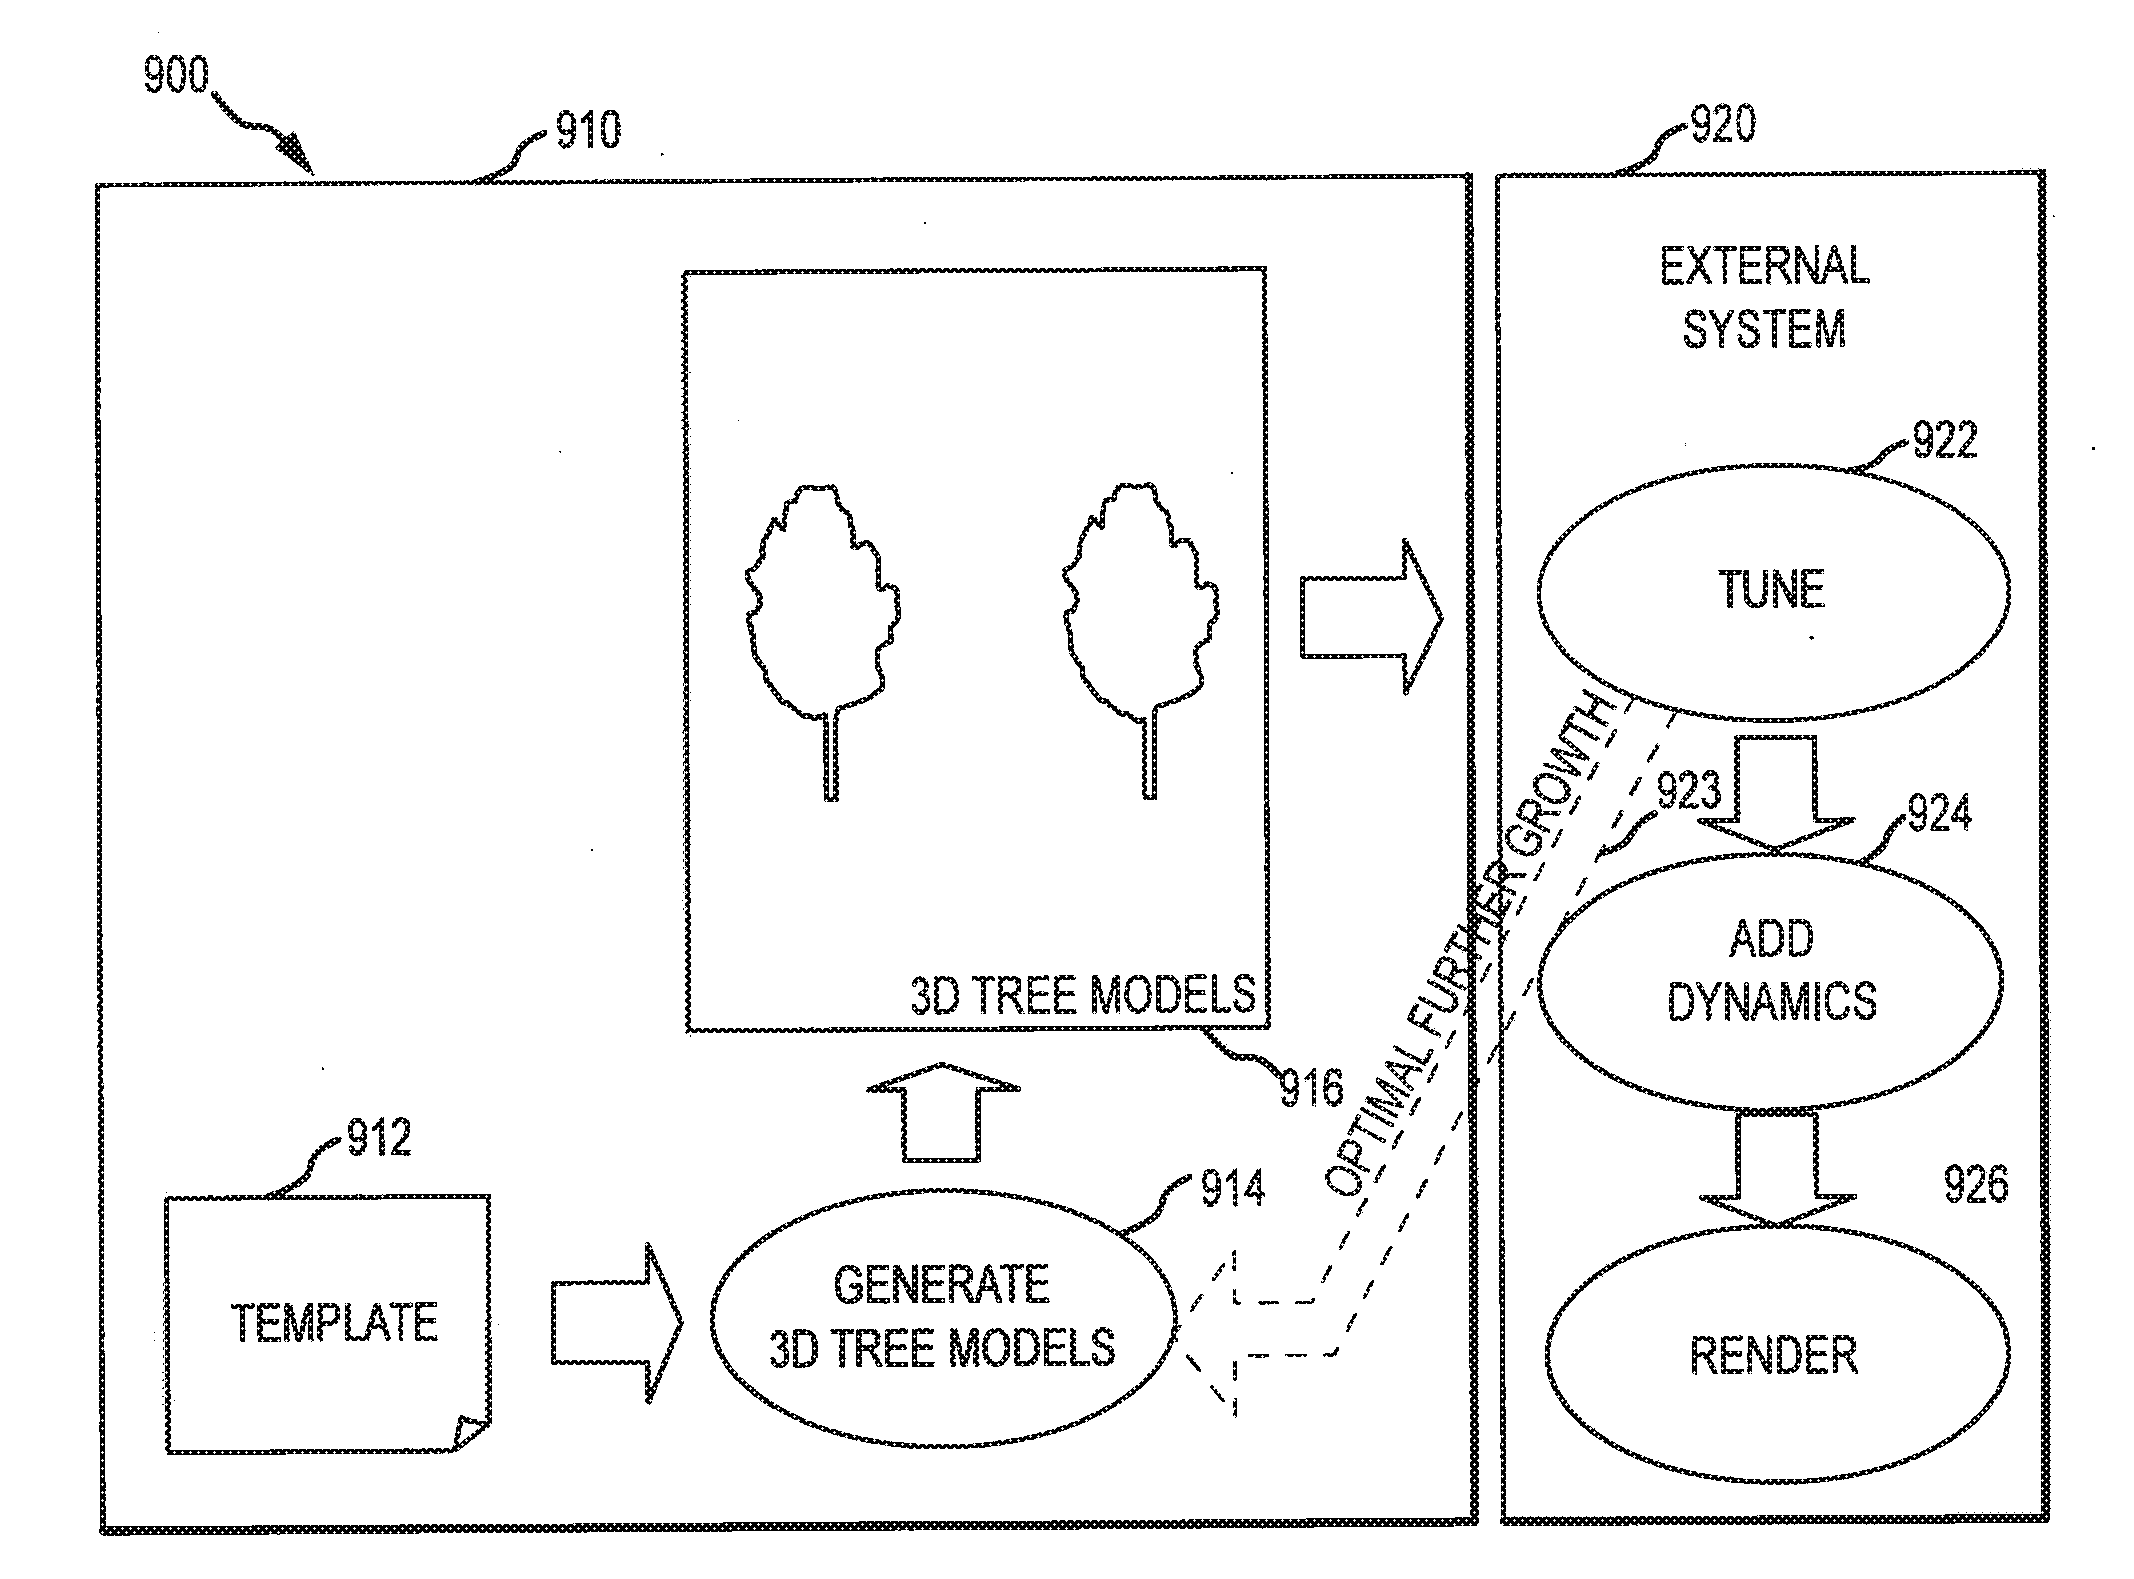 Particle-based method of generating and animating three-dimensional vegetation